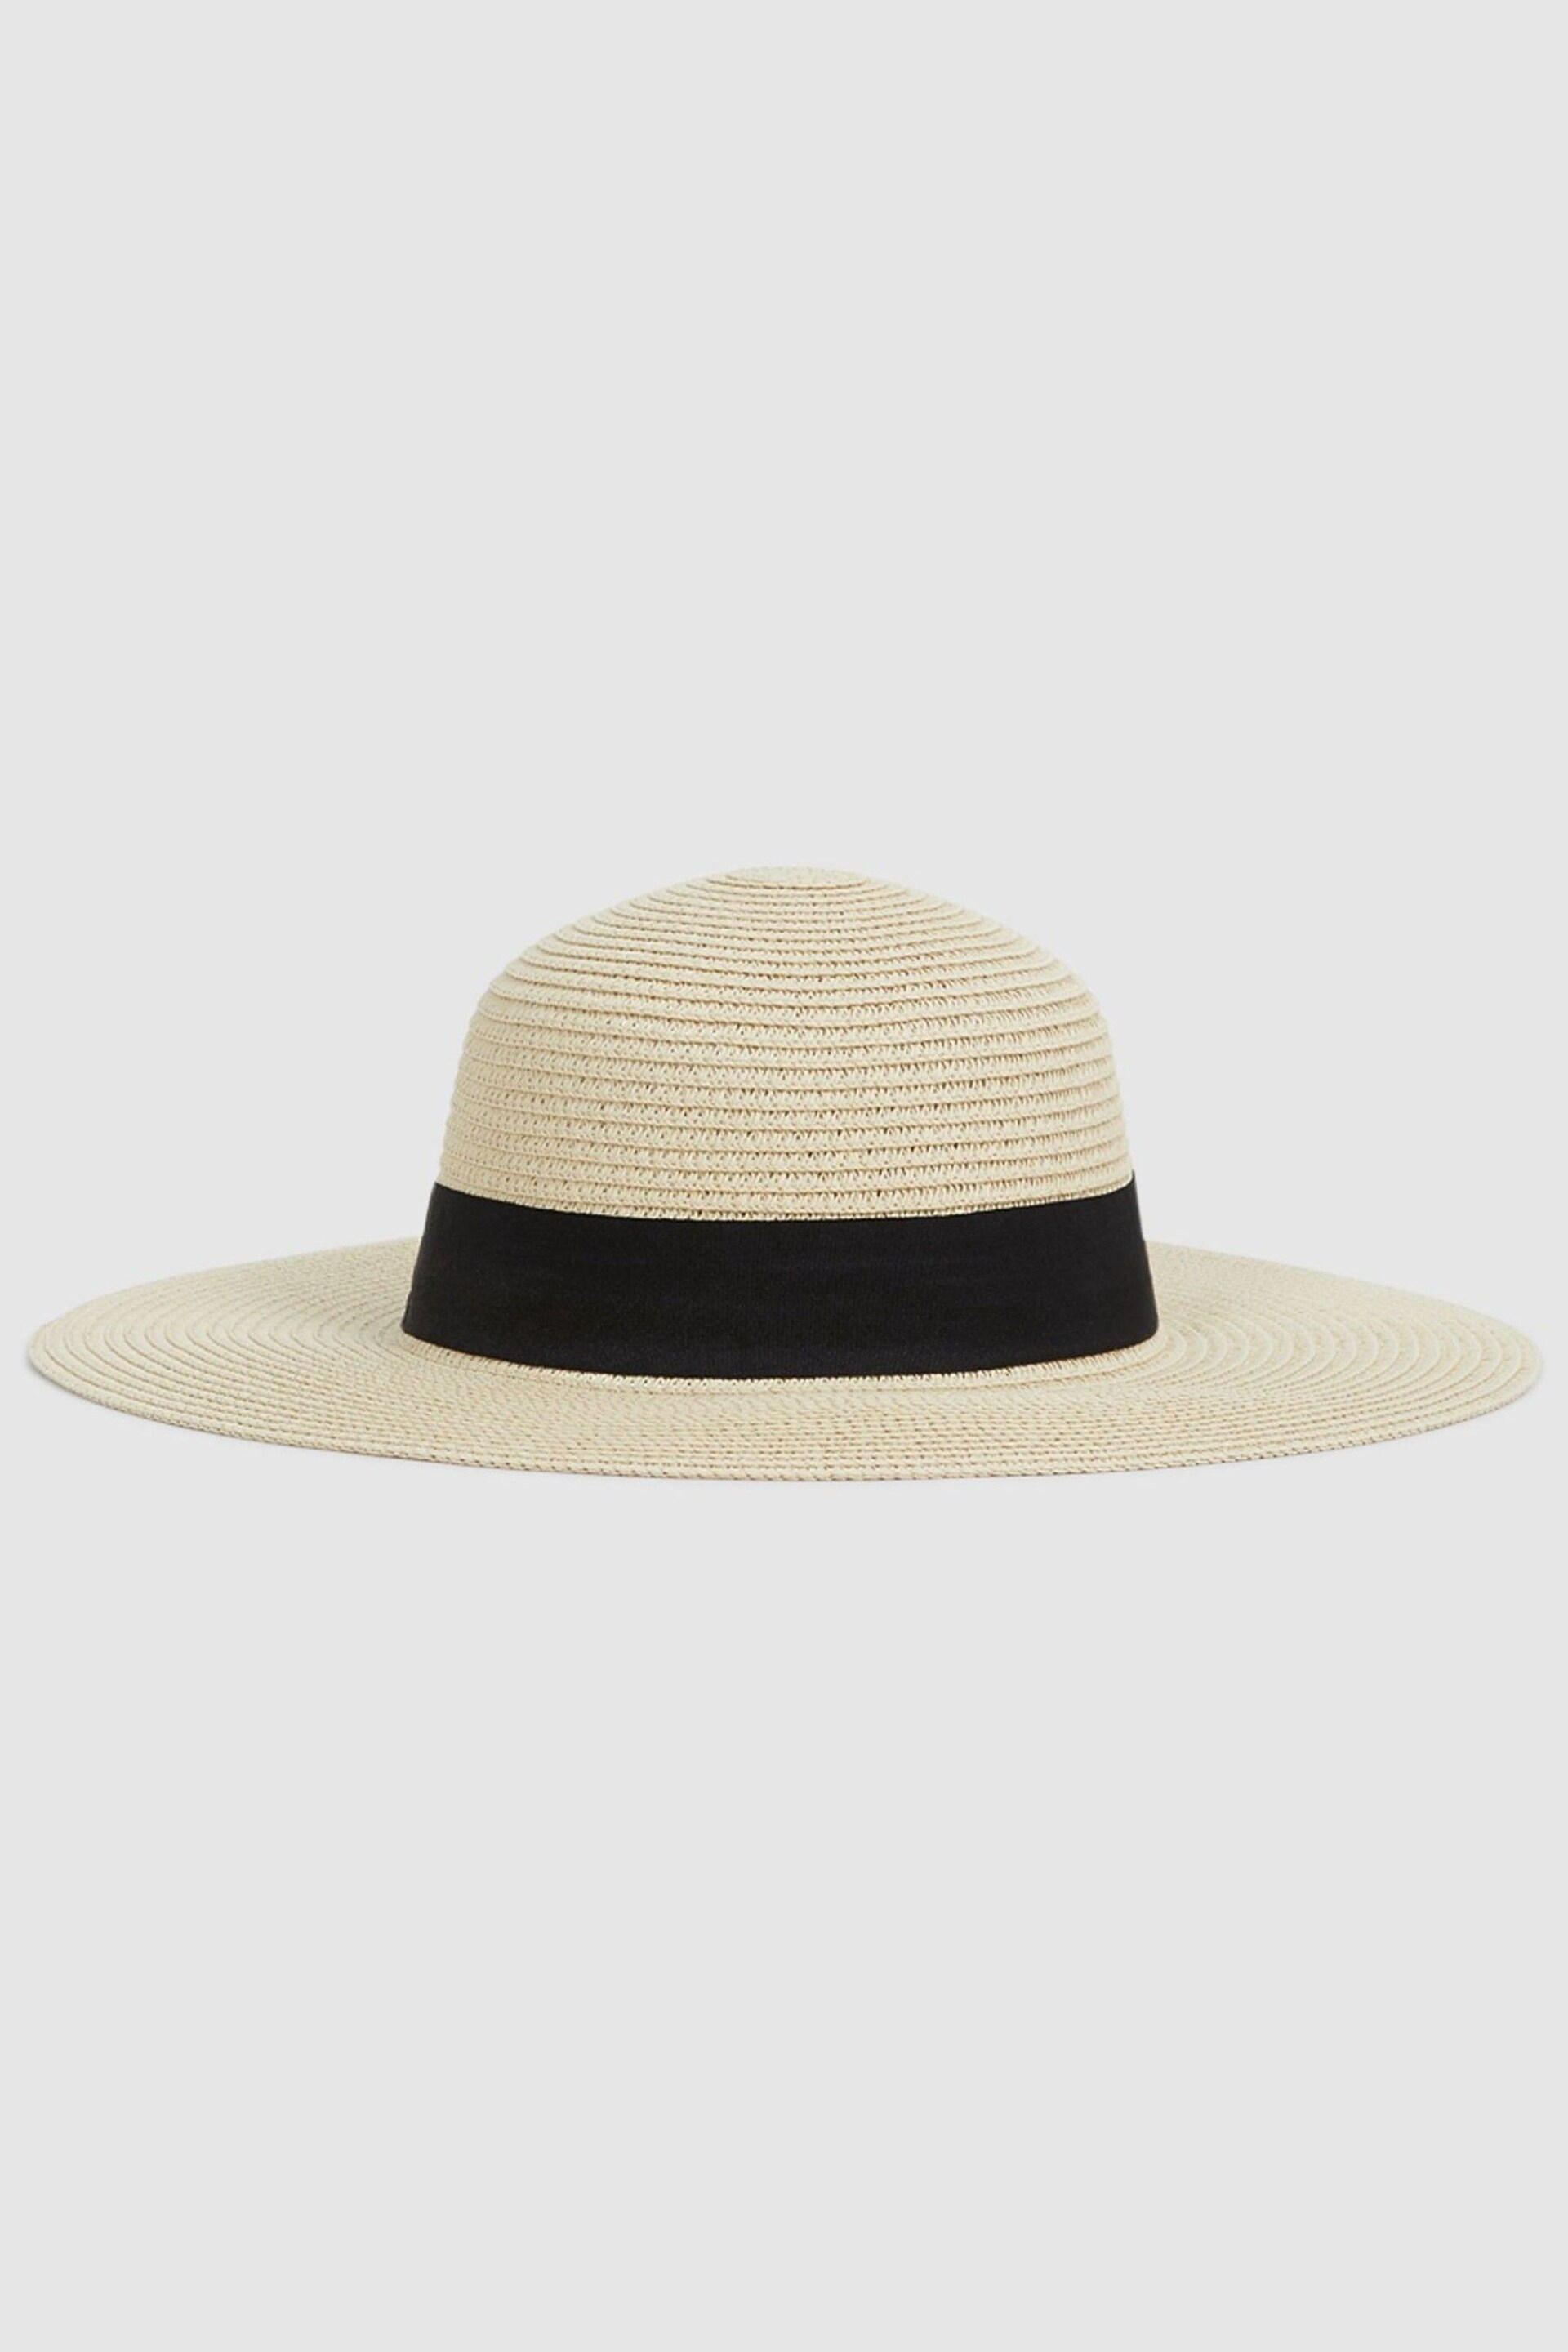 Reiss Natural Lexi Woven Wide Brim Hat - Image 1 of 5